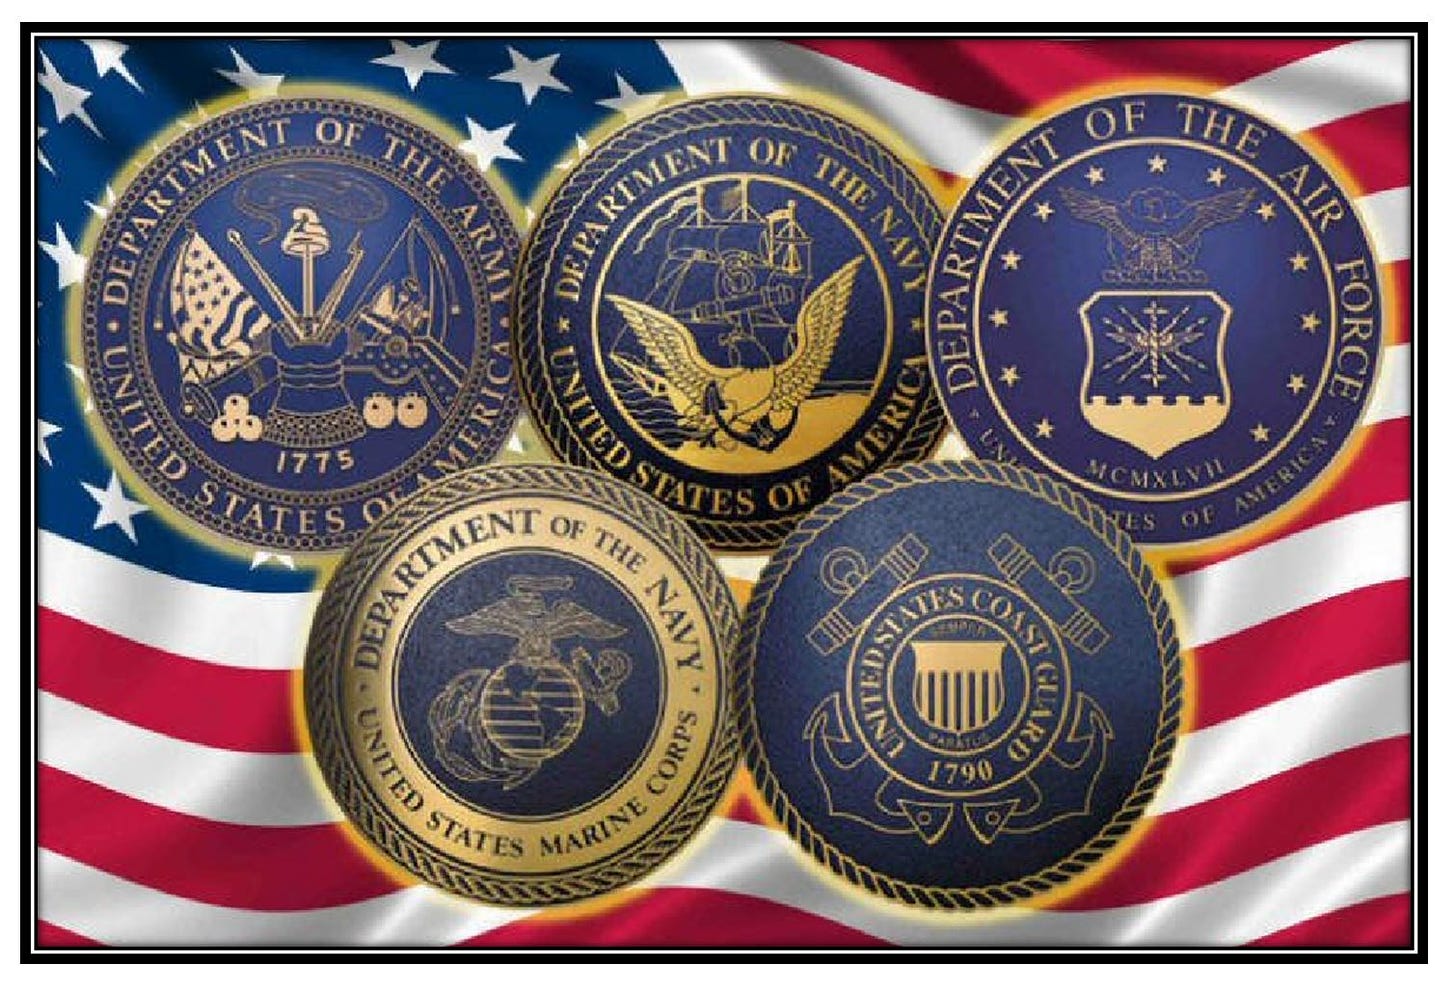 Emblems for each military branch are super imposed on the American flag.